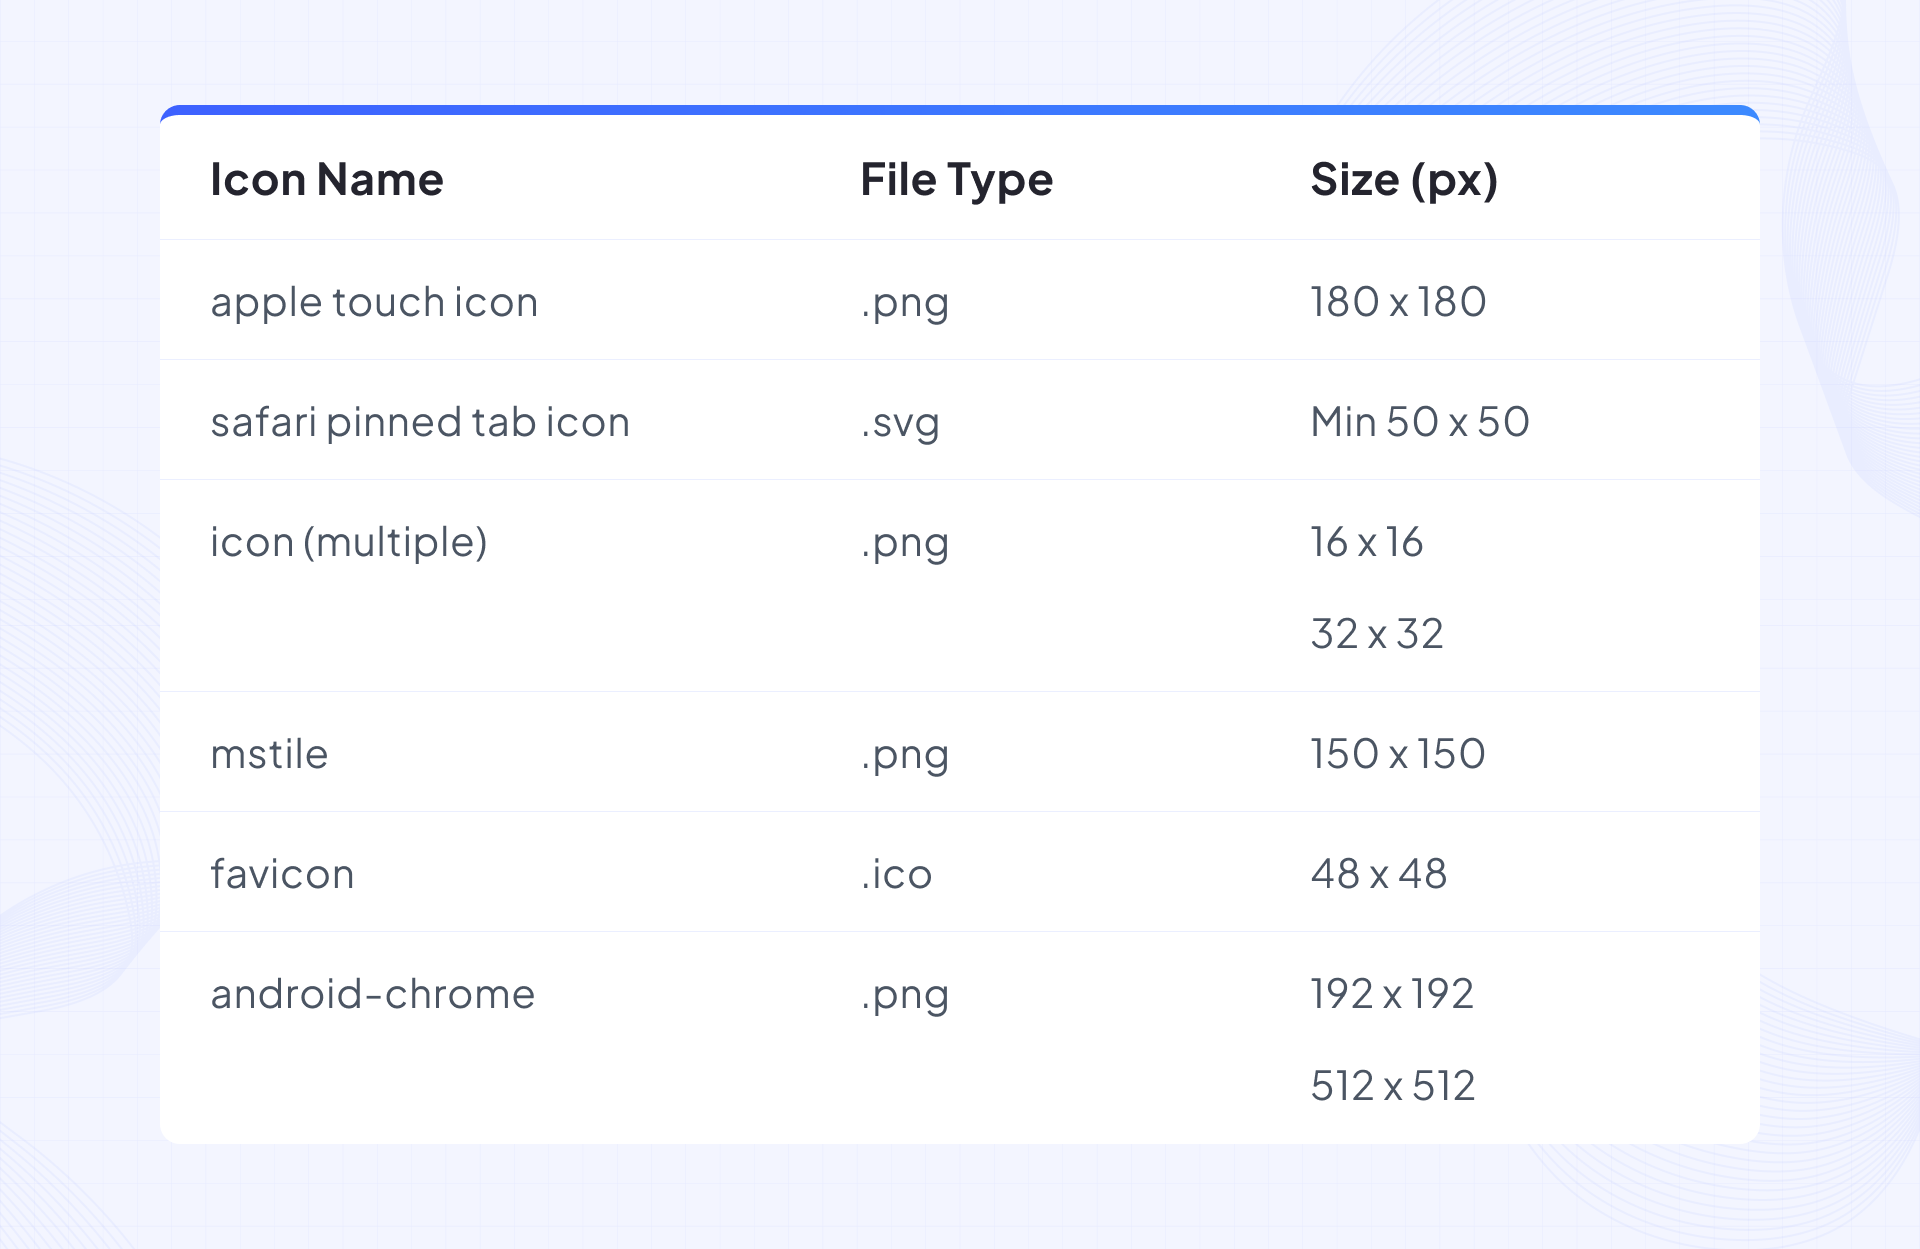 Table of favicon formats and sizes for specific uses